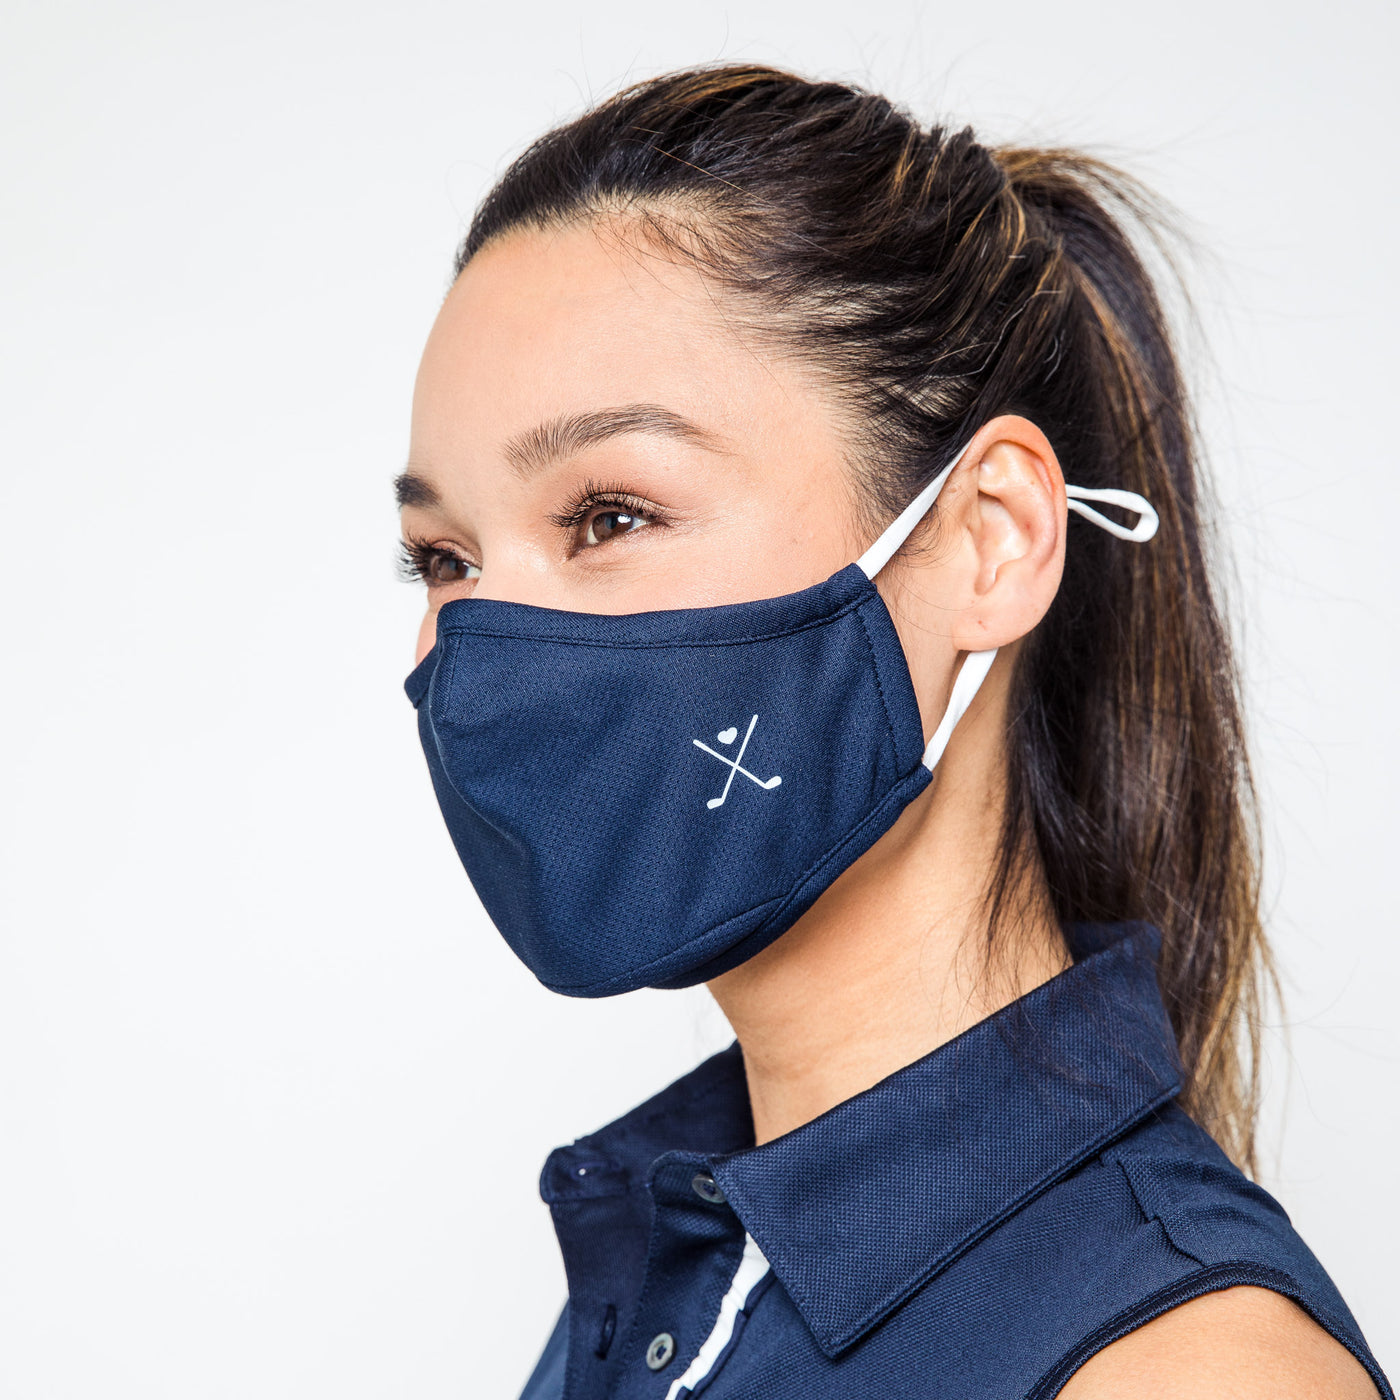 woman wearing navy face mask with white crossed golf clubs printed on one side